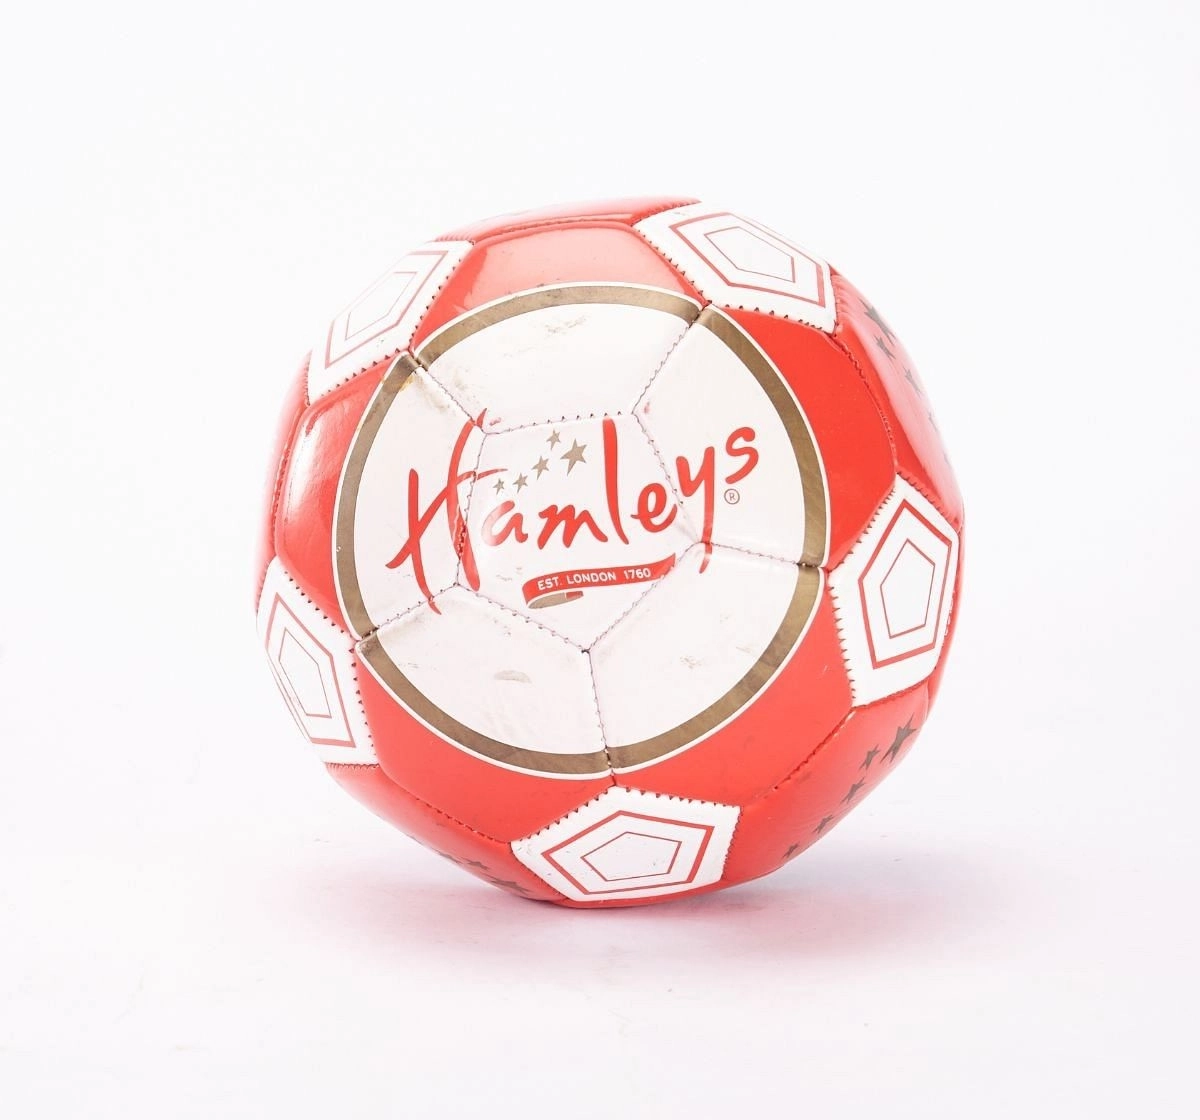 Hamleys Football Small Ball Sports & Accessories for Kids age 3Y+ (Red)